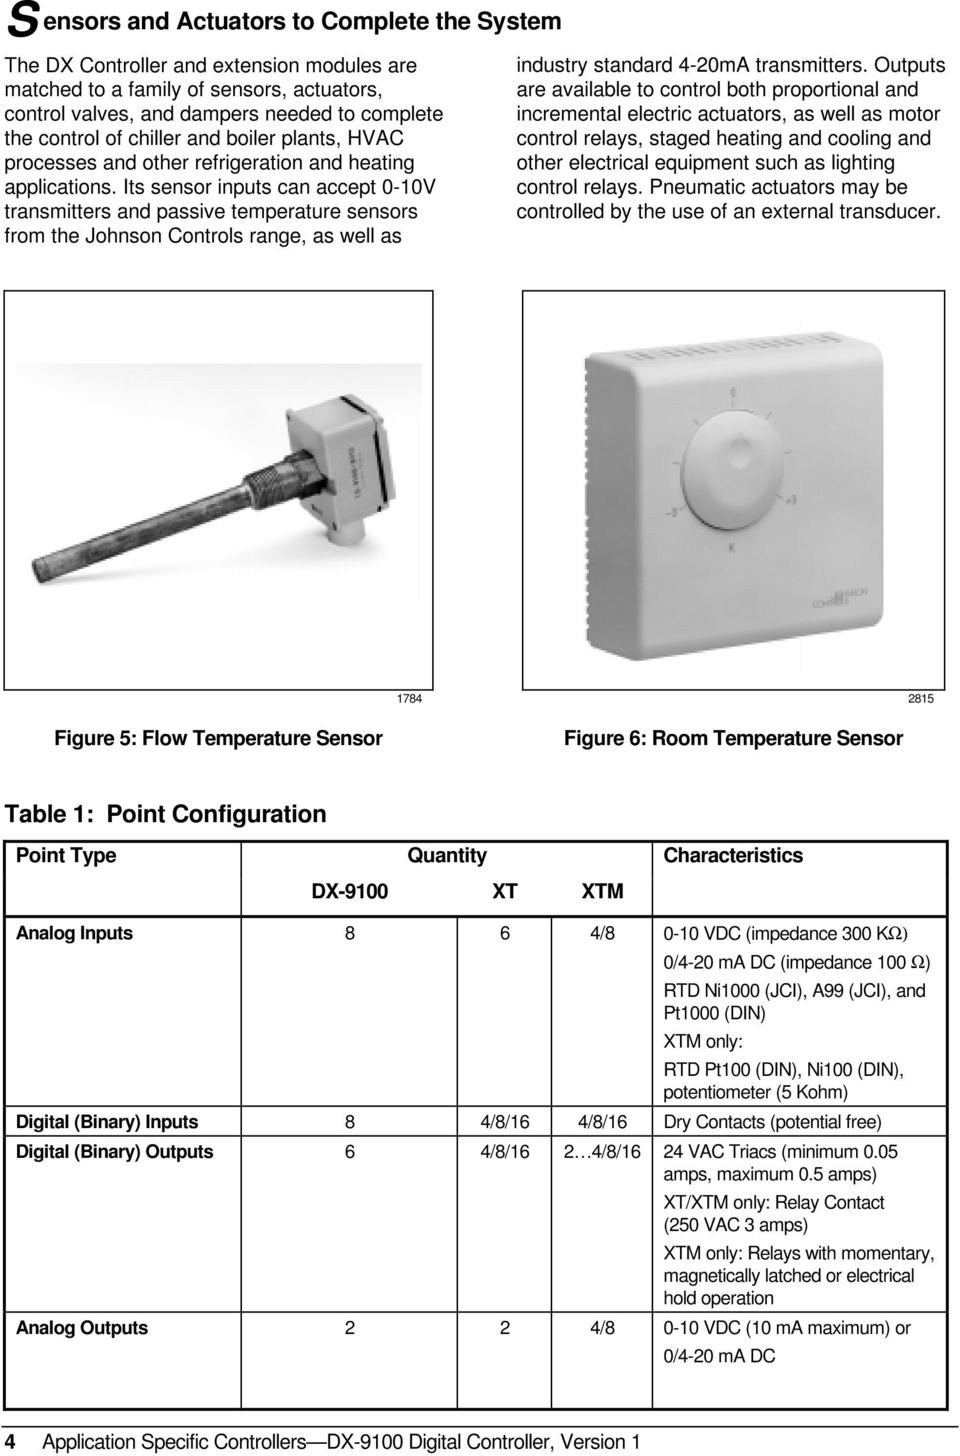 Its sensor inputs can accept 0-10V transmitters and passive temperature sensors from the Johnson Controls range, as well as industry standard 4-20mA transmitters.